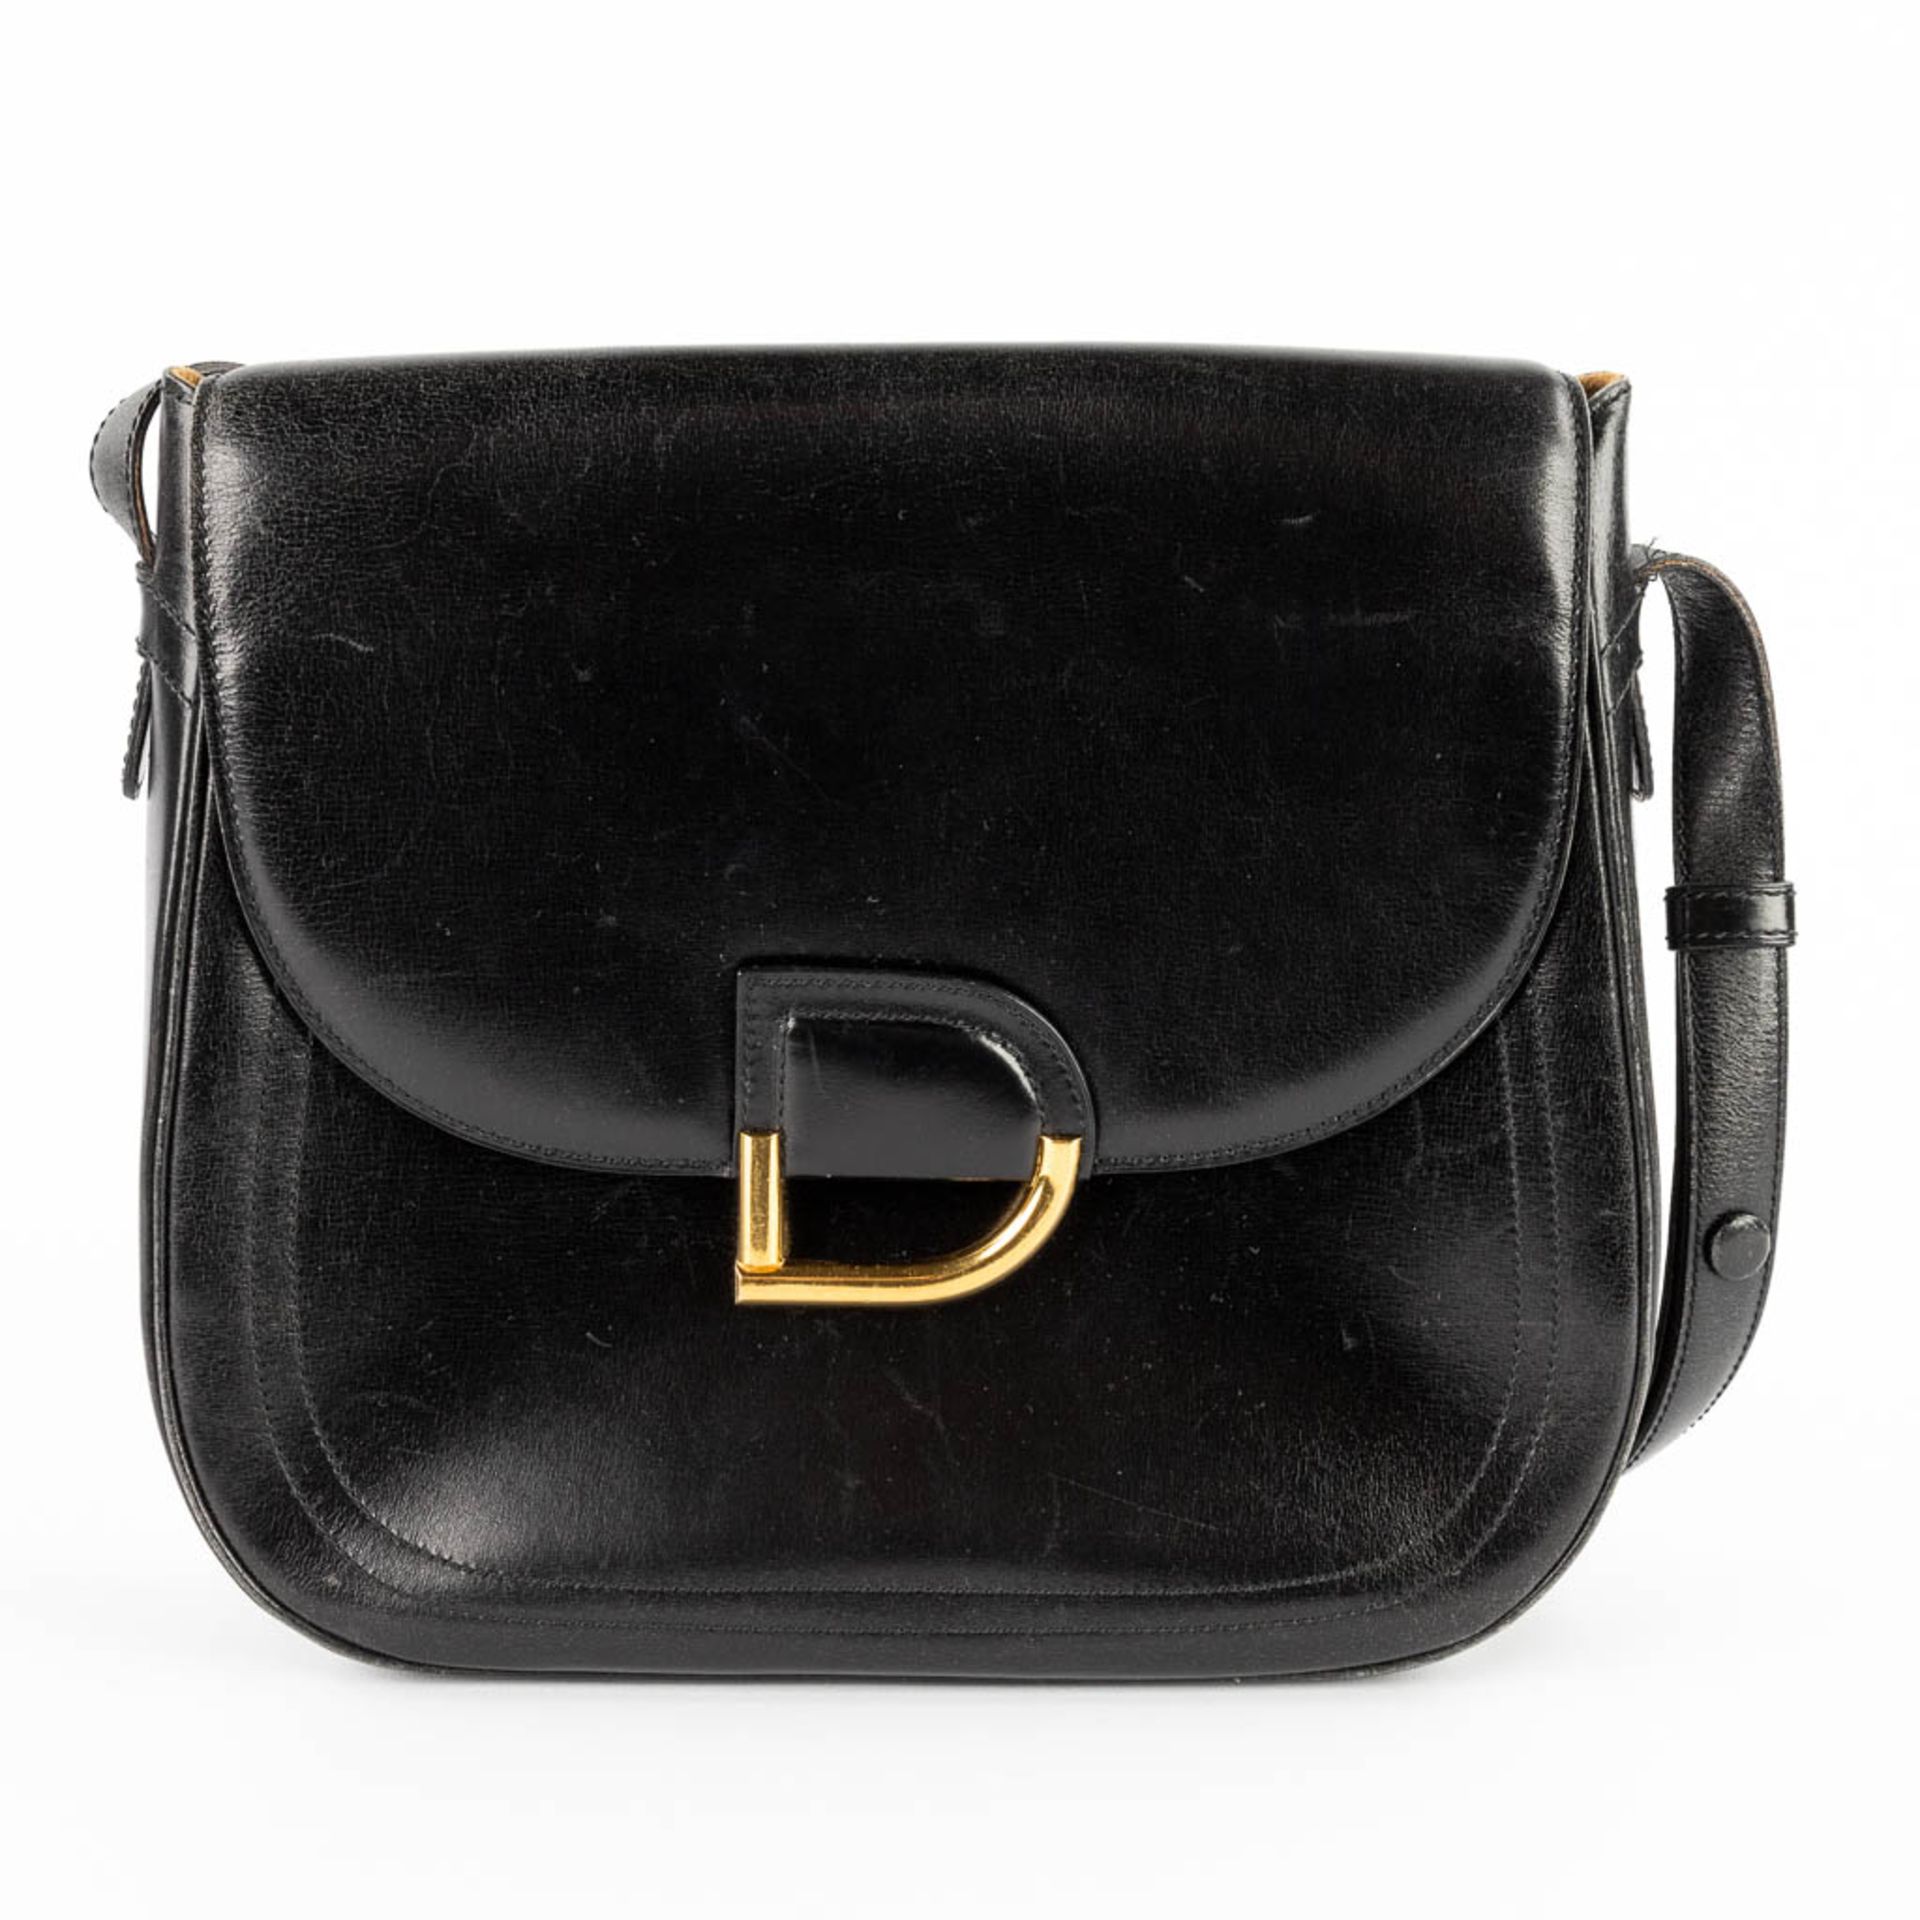 Delvaux, three handbags made of black leather. (W:28 x H:22 cm) - Image 5 of 41